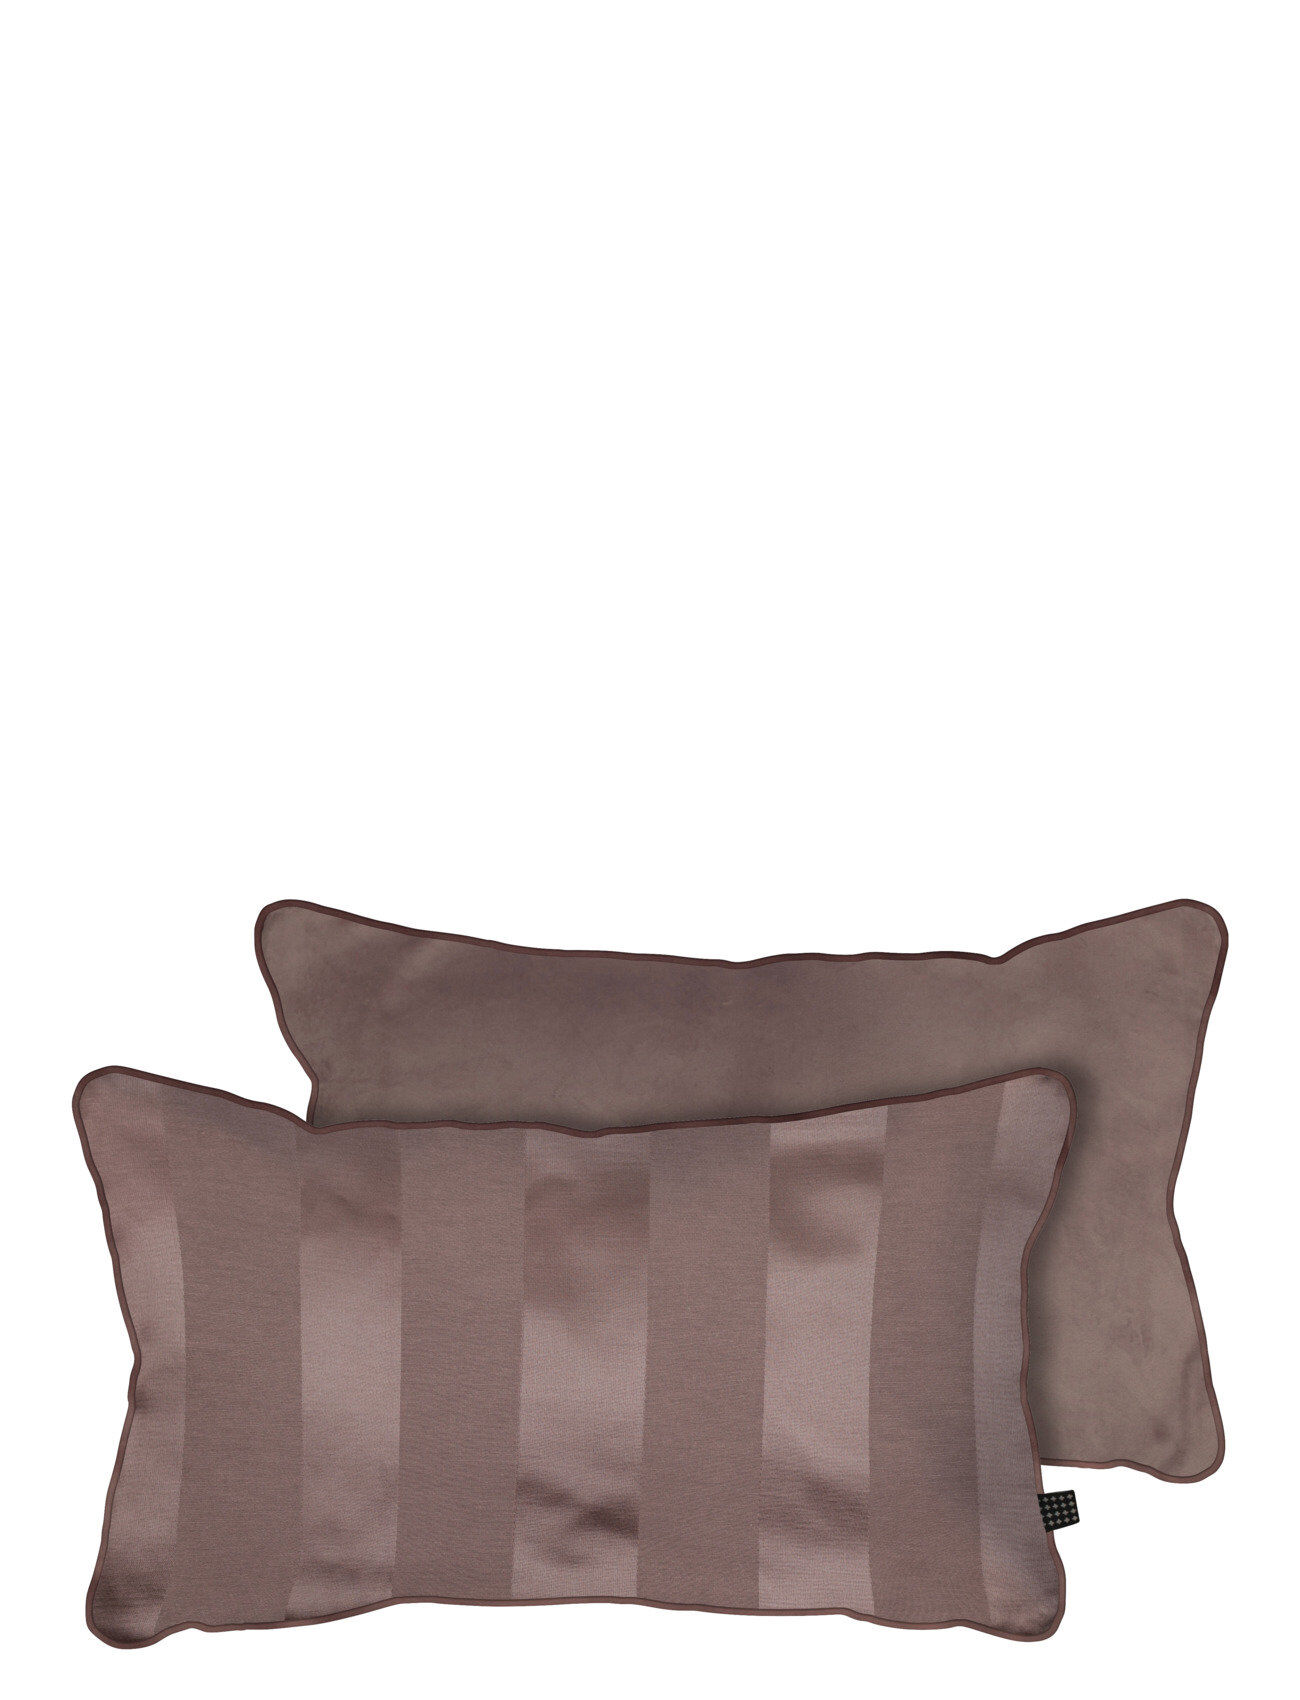 Mette Ditmer Atelier Cushion, With Filling Home Textiles Cushions & Blankets Cushions Rosa Mette Ditmer